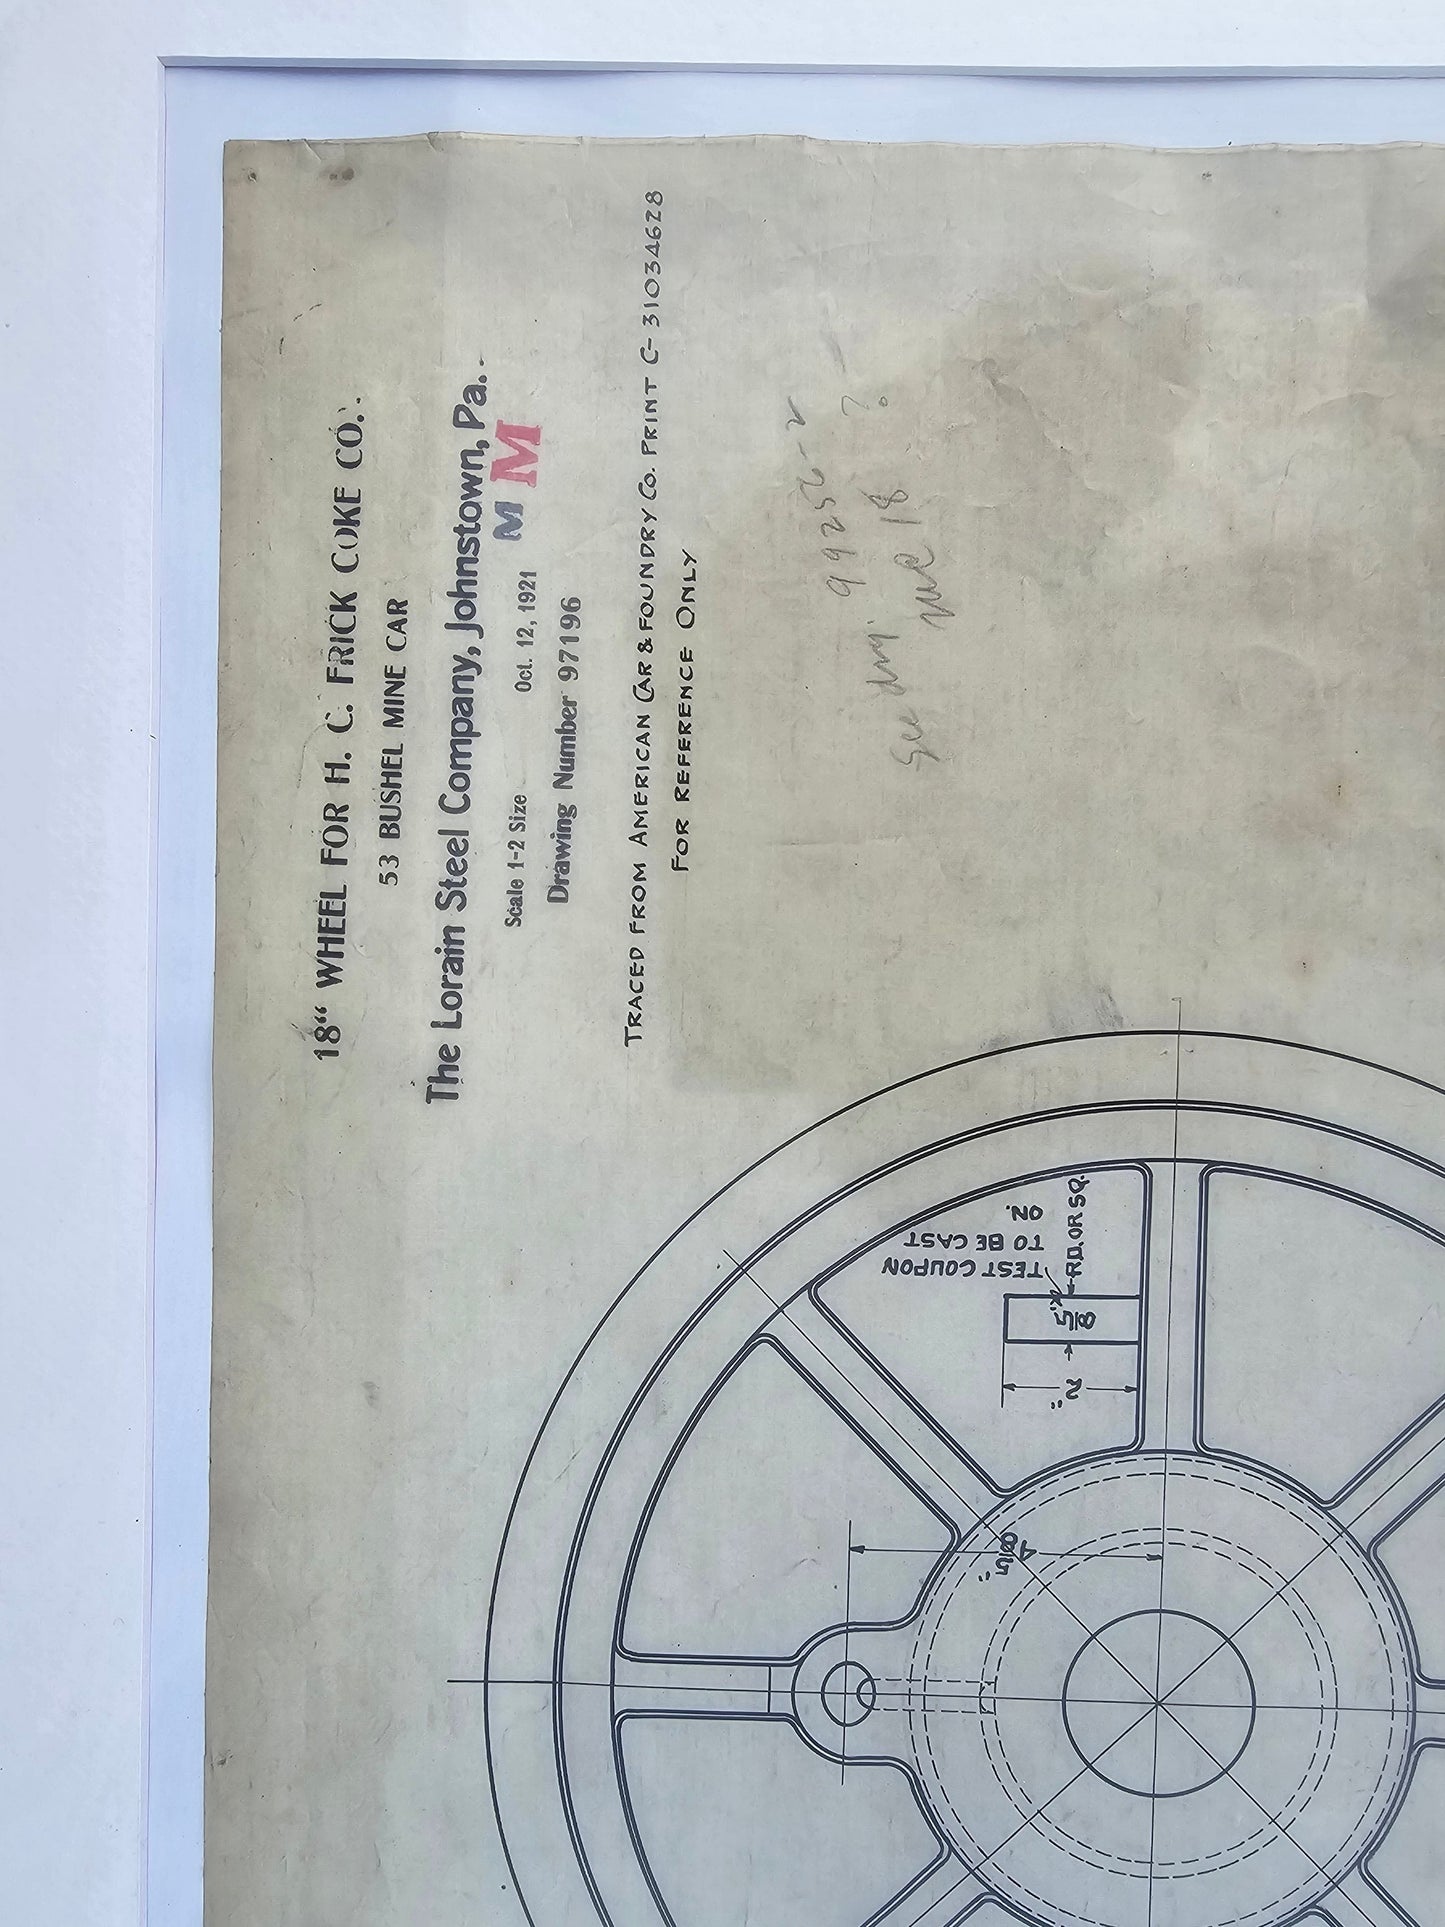 97196 original Ink on Drawing cloth coal wheel for Pittsburgh icon H. C.Frick Co.